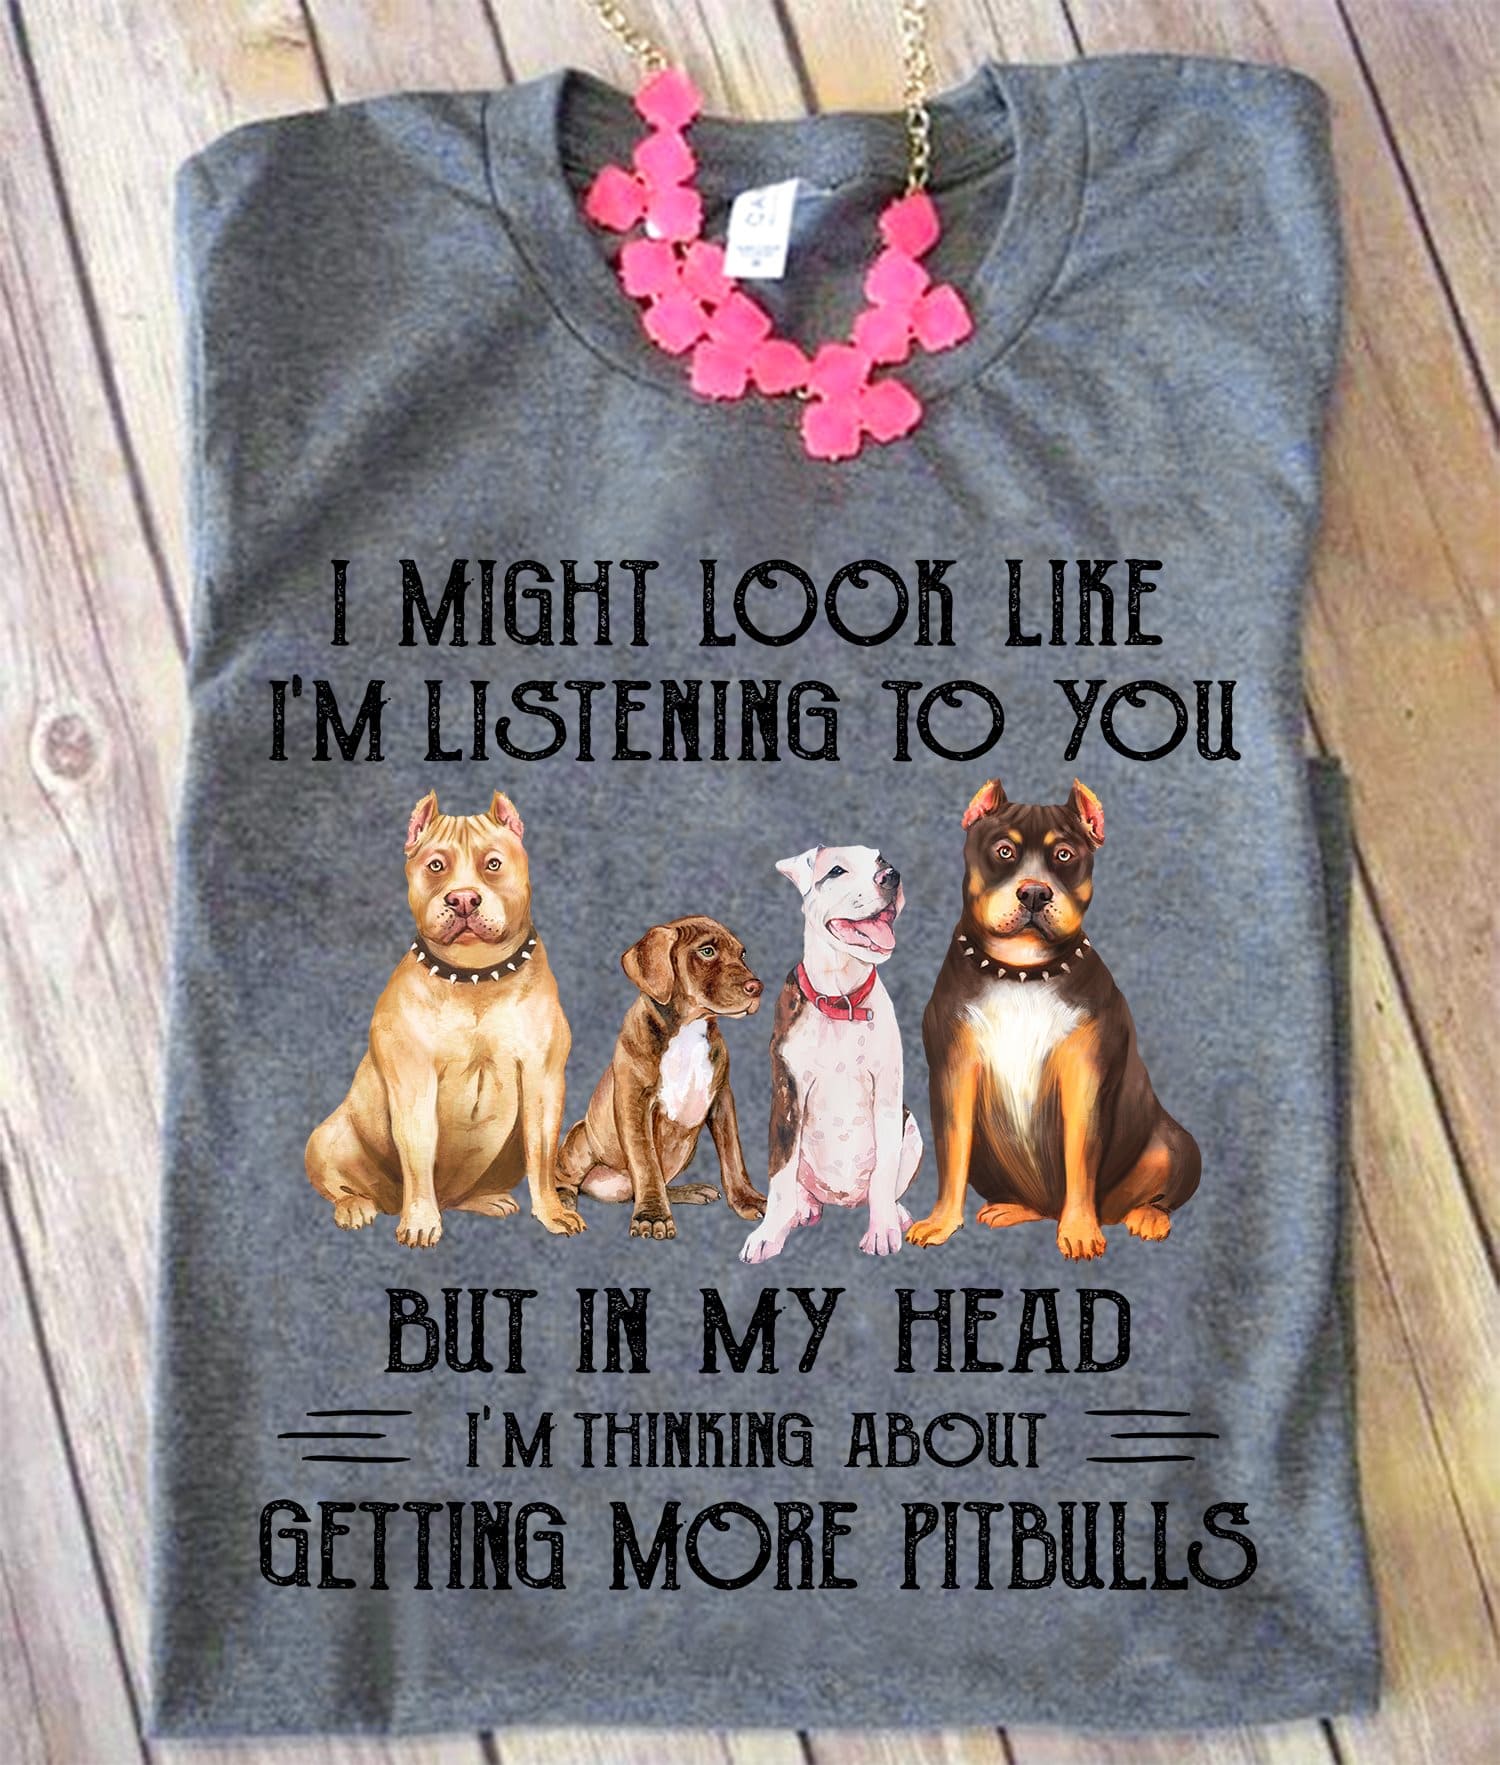 I might look like I'm listening to you but in my head I'm thinking about getting more Pitbulls - Pitbull dog owner